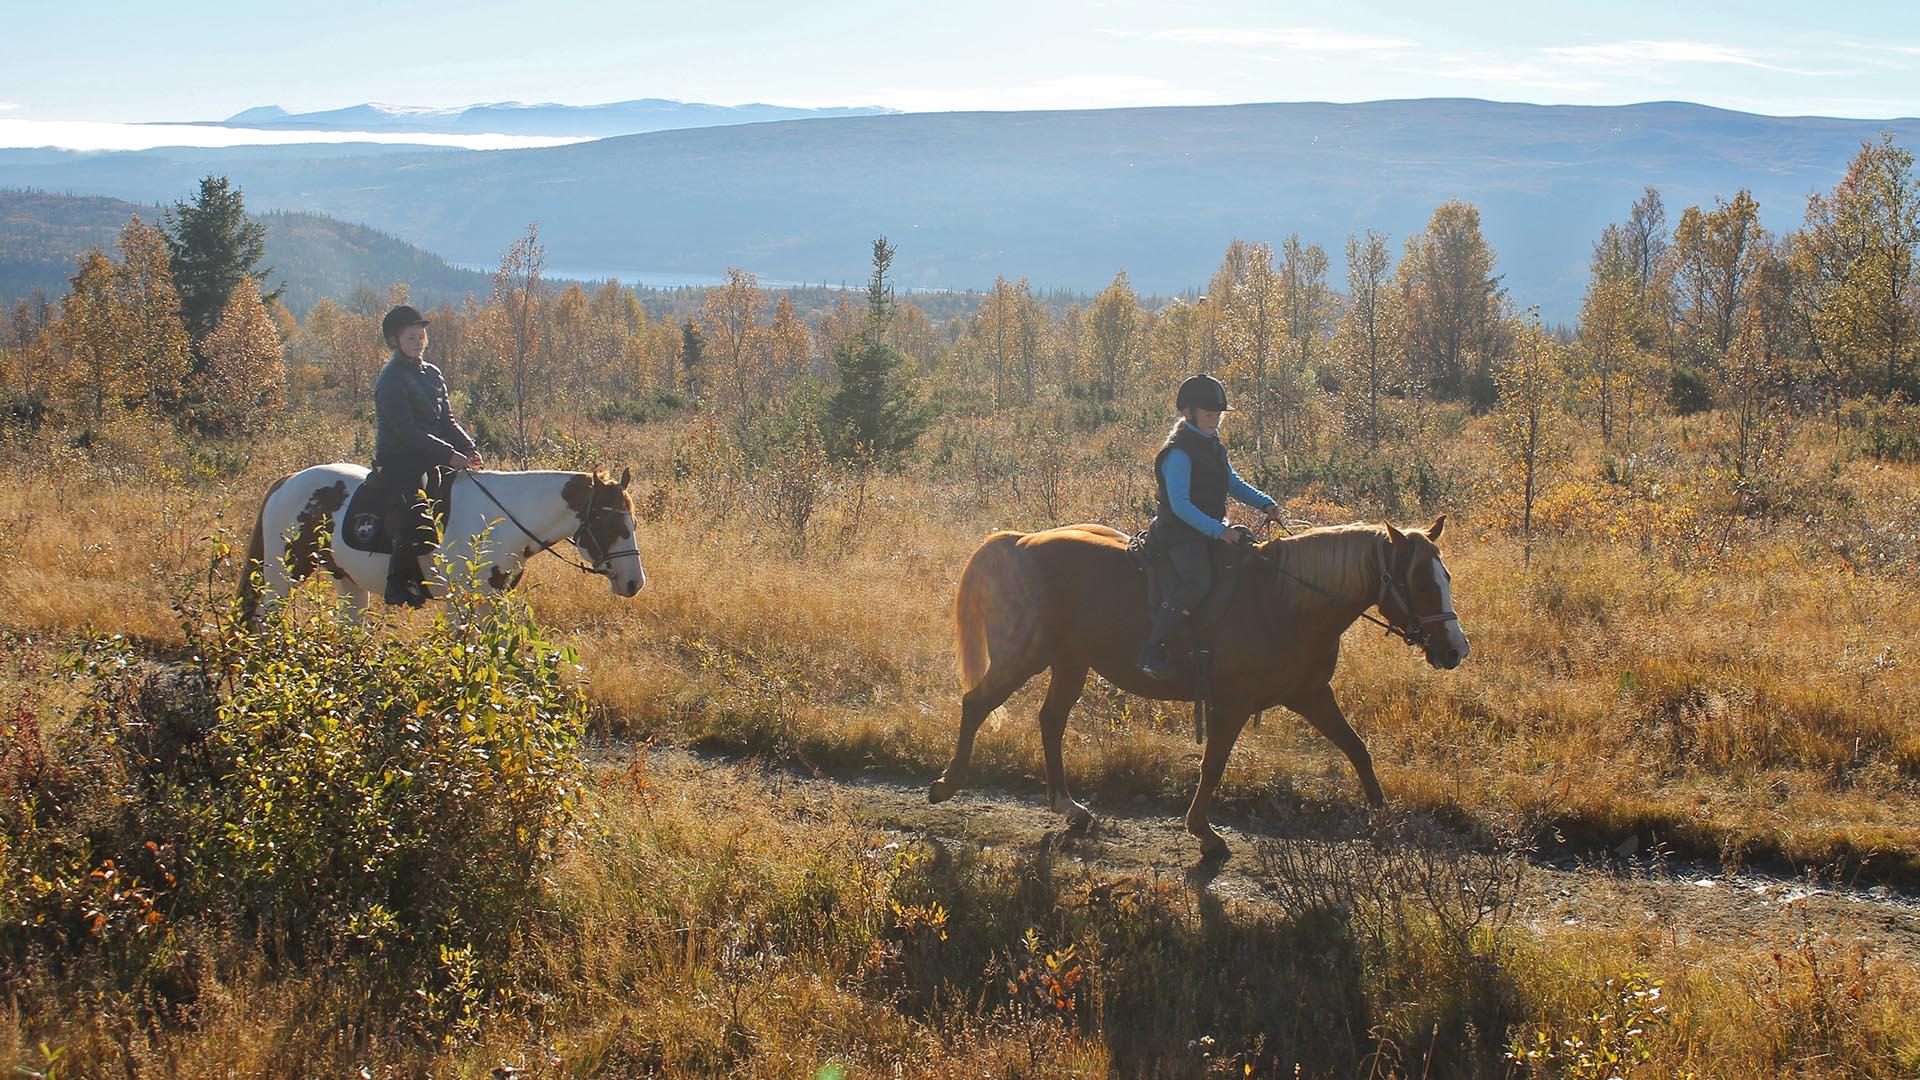 Two riders on horseback on a trail through yellow-coloured autumn landscape